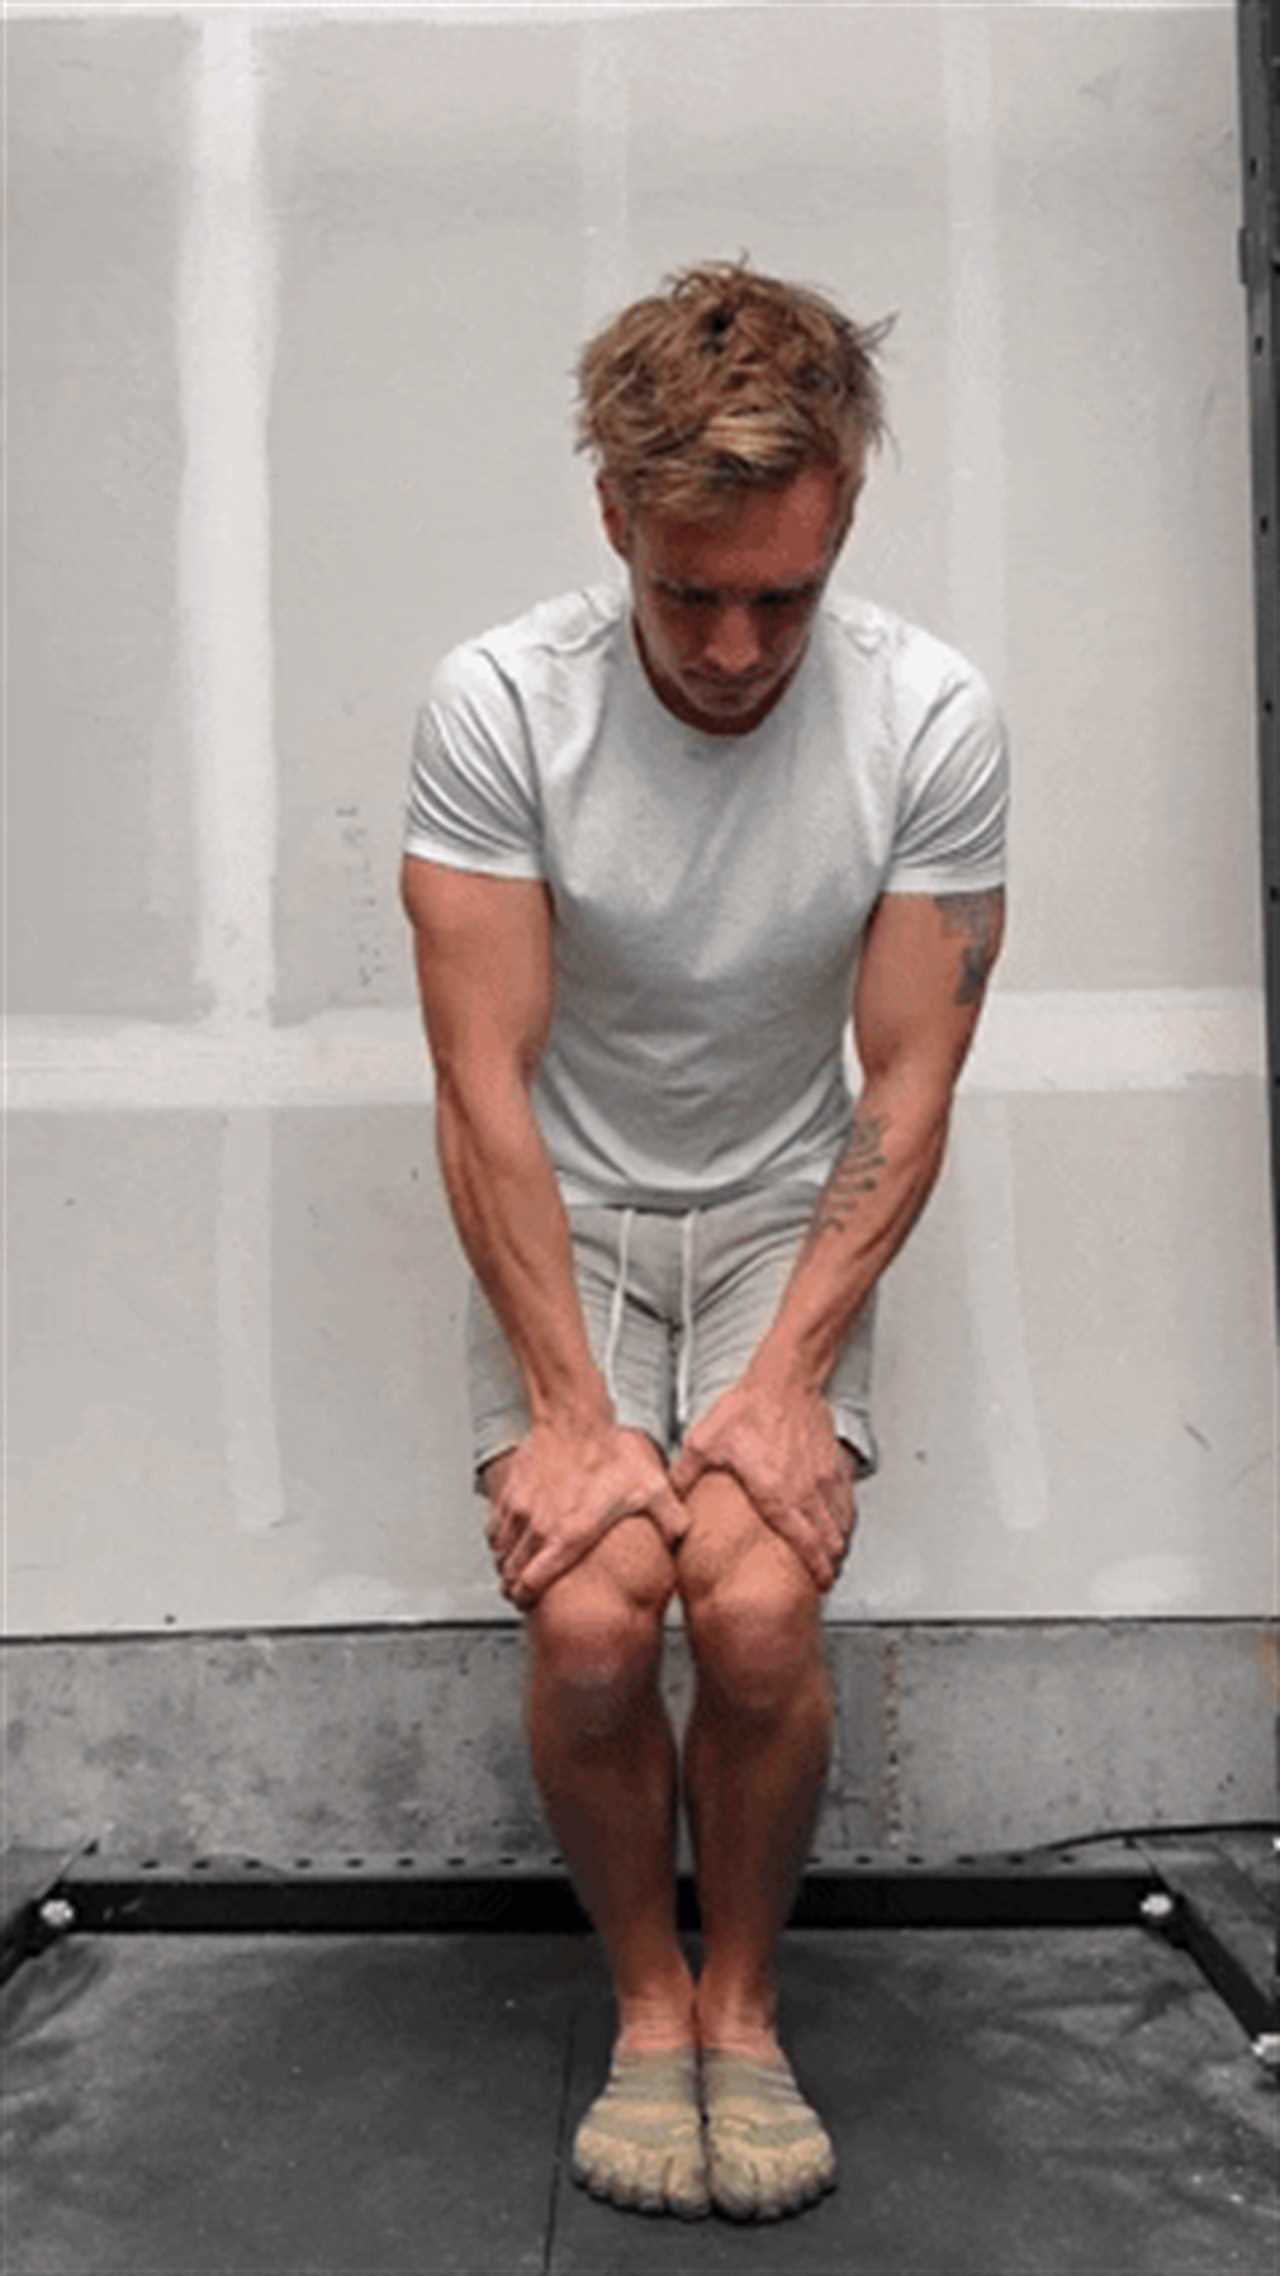 7 Exercises to Reduce Knee Pain